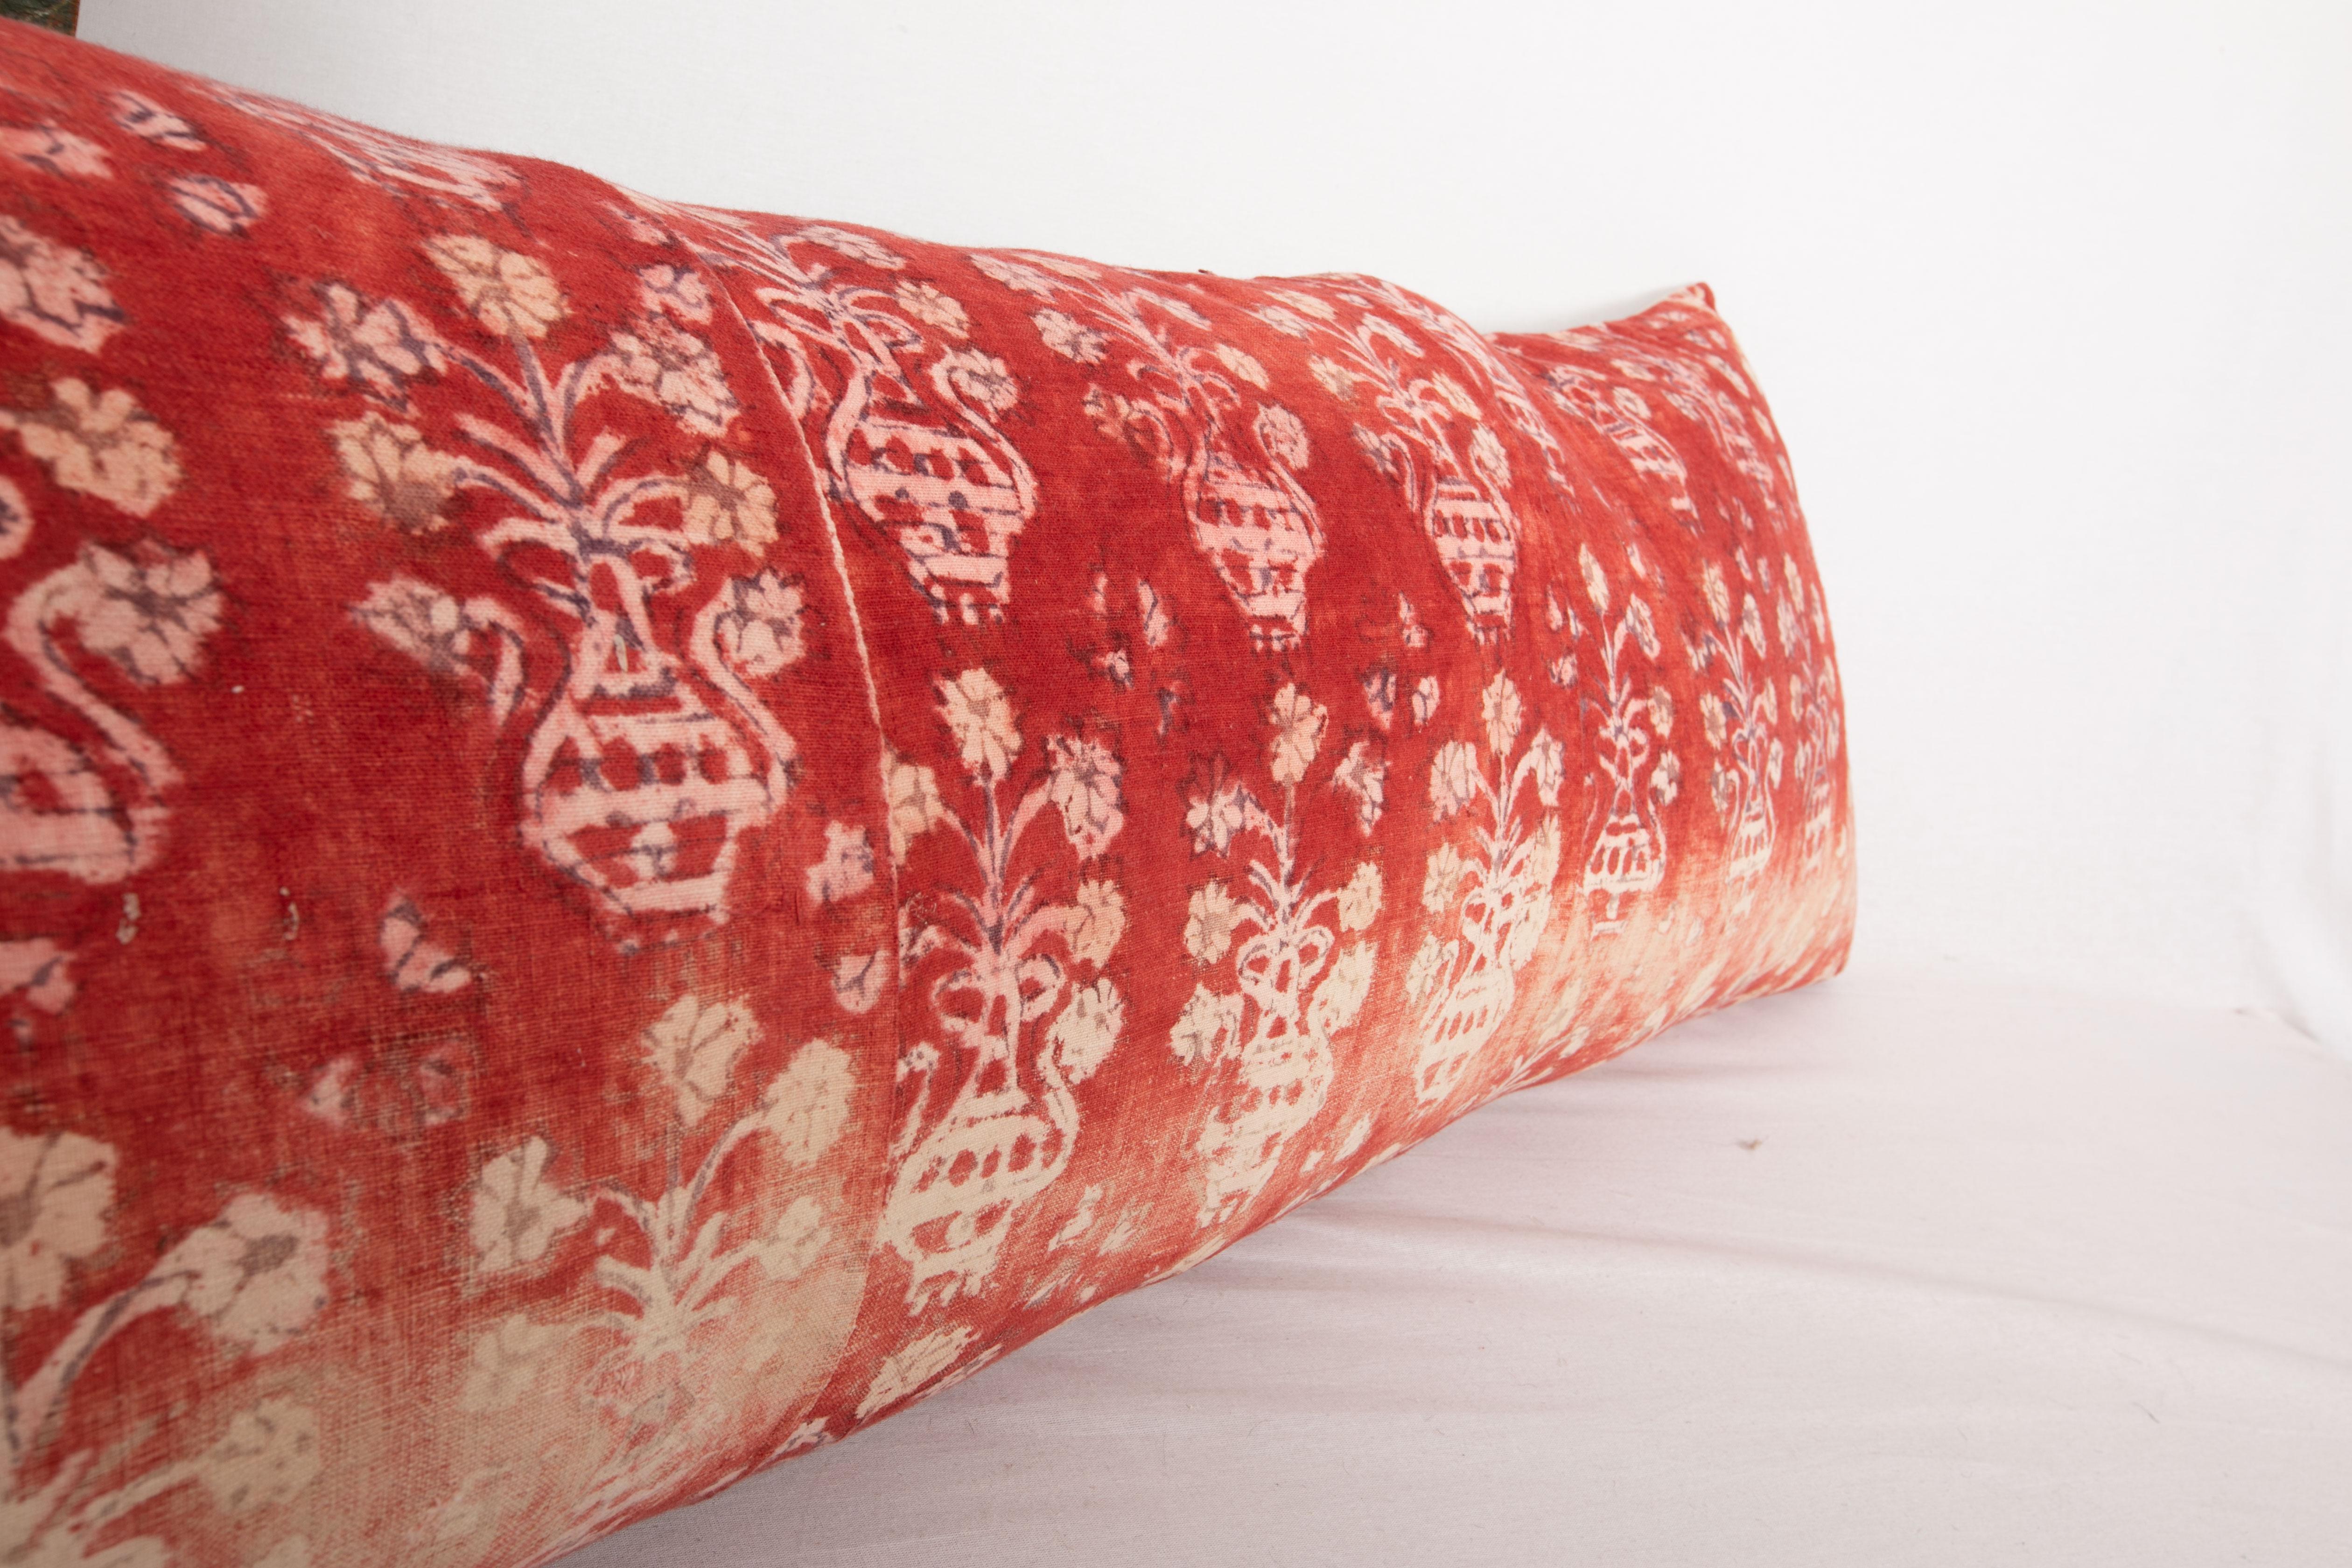 Rustic Giant Block Printed Pillow Cover, Western Anatolia, Turkey, E 20th C. For Sale